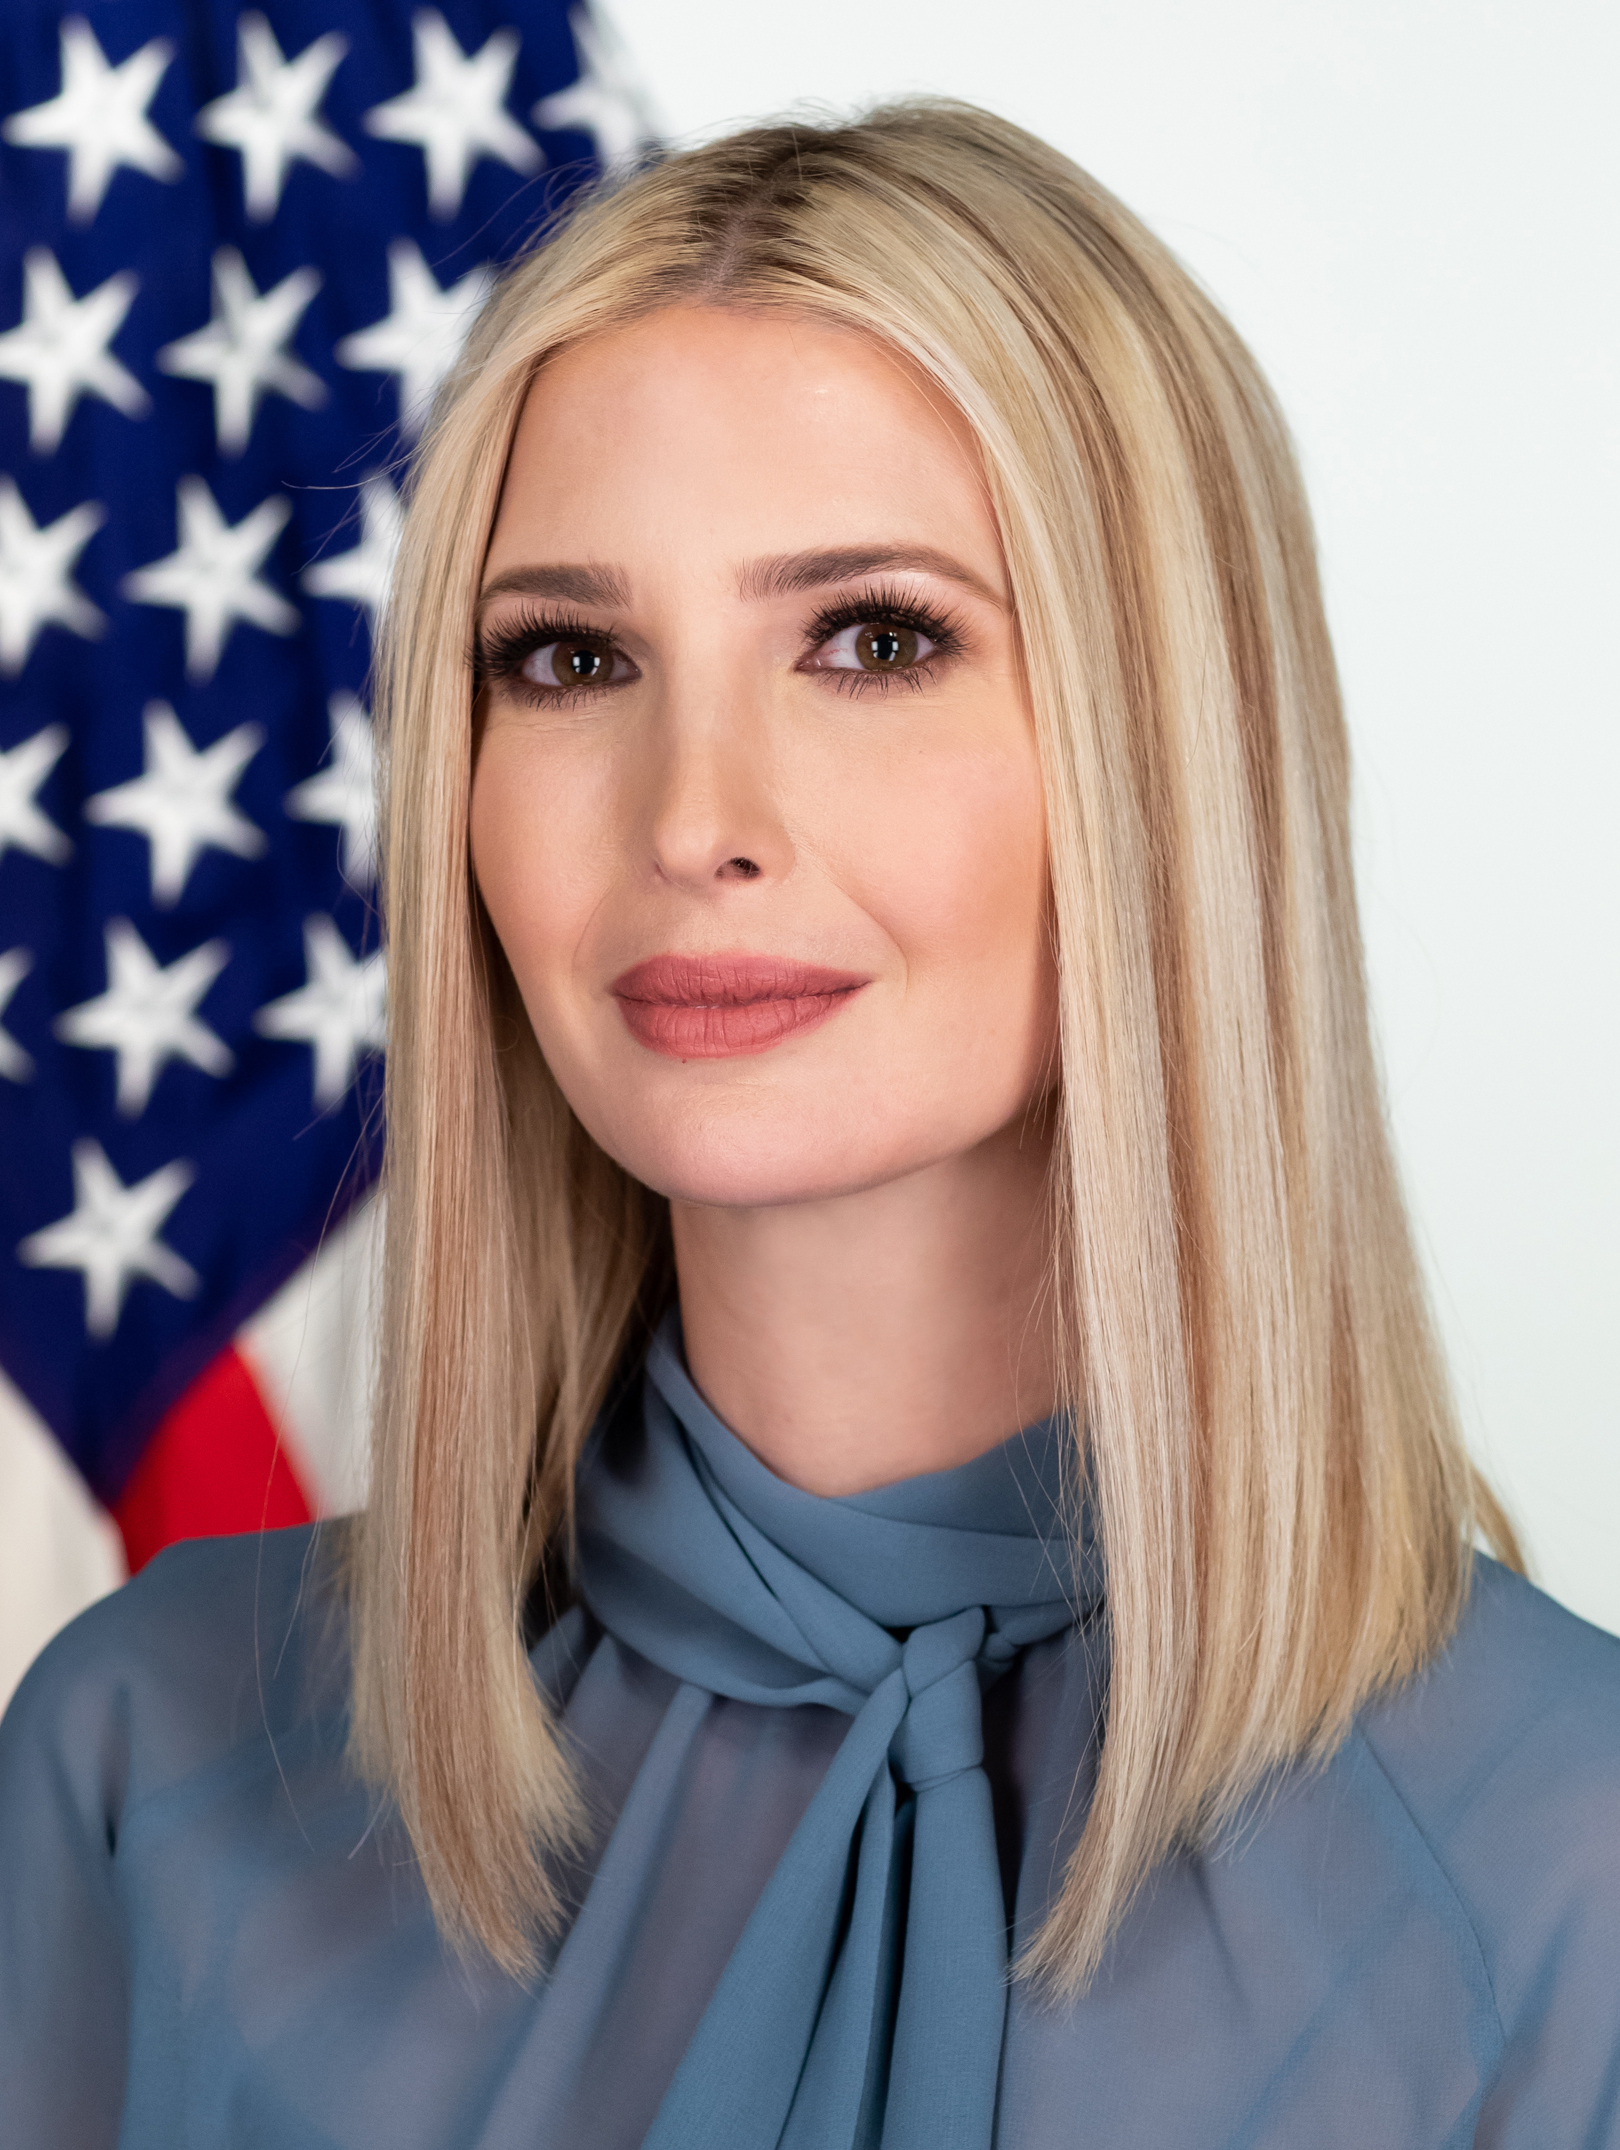 Ivanka Trump has an updated official portrait taken in the Eisenhower Executive Office Building of the White House Wednesday, Feb. 12, 2020. (Official White House Photo by Andrea Hanks)